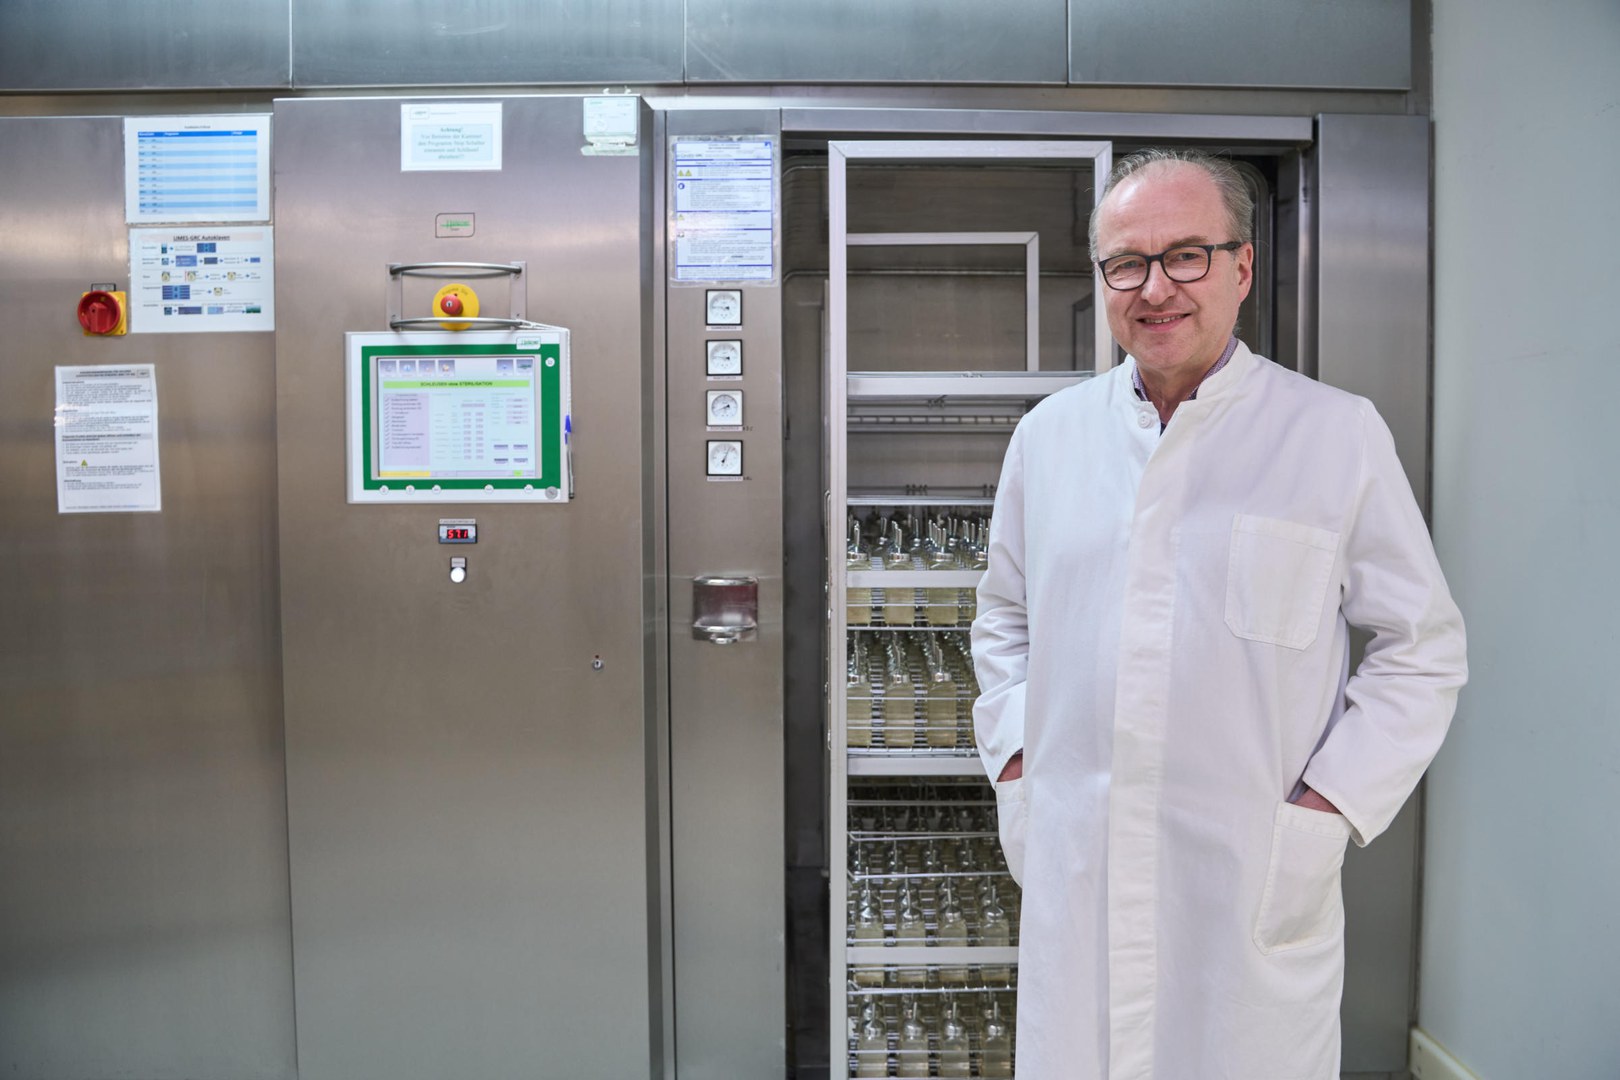 Prof. Waldemar Kolanus in front of one of the large sterilization machines, a so-called autoclave.